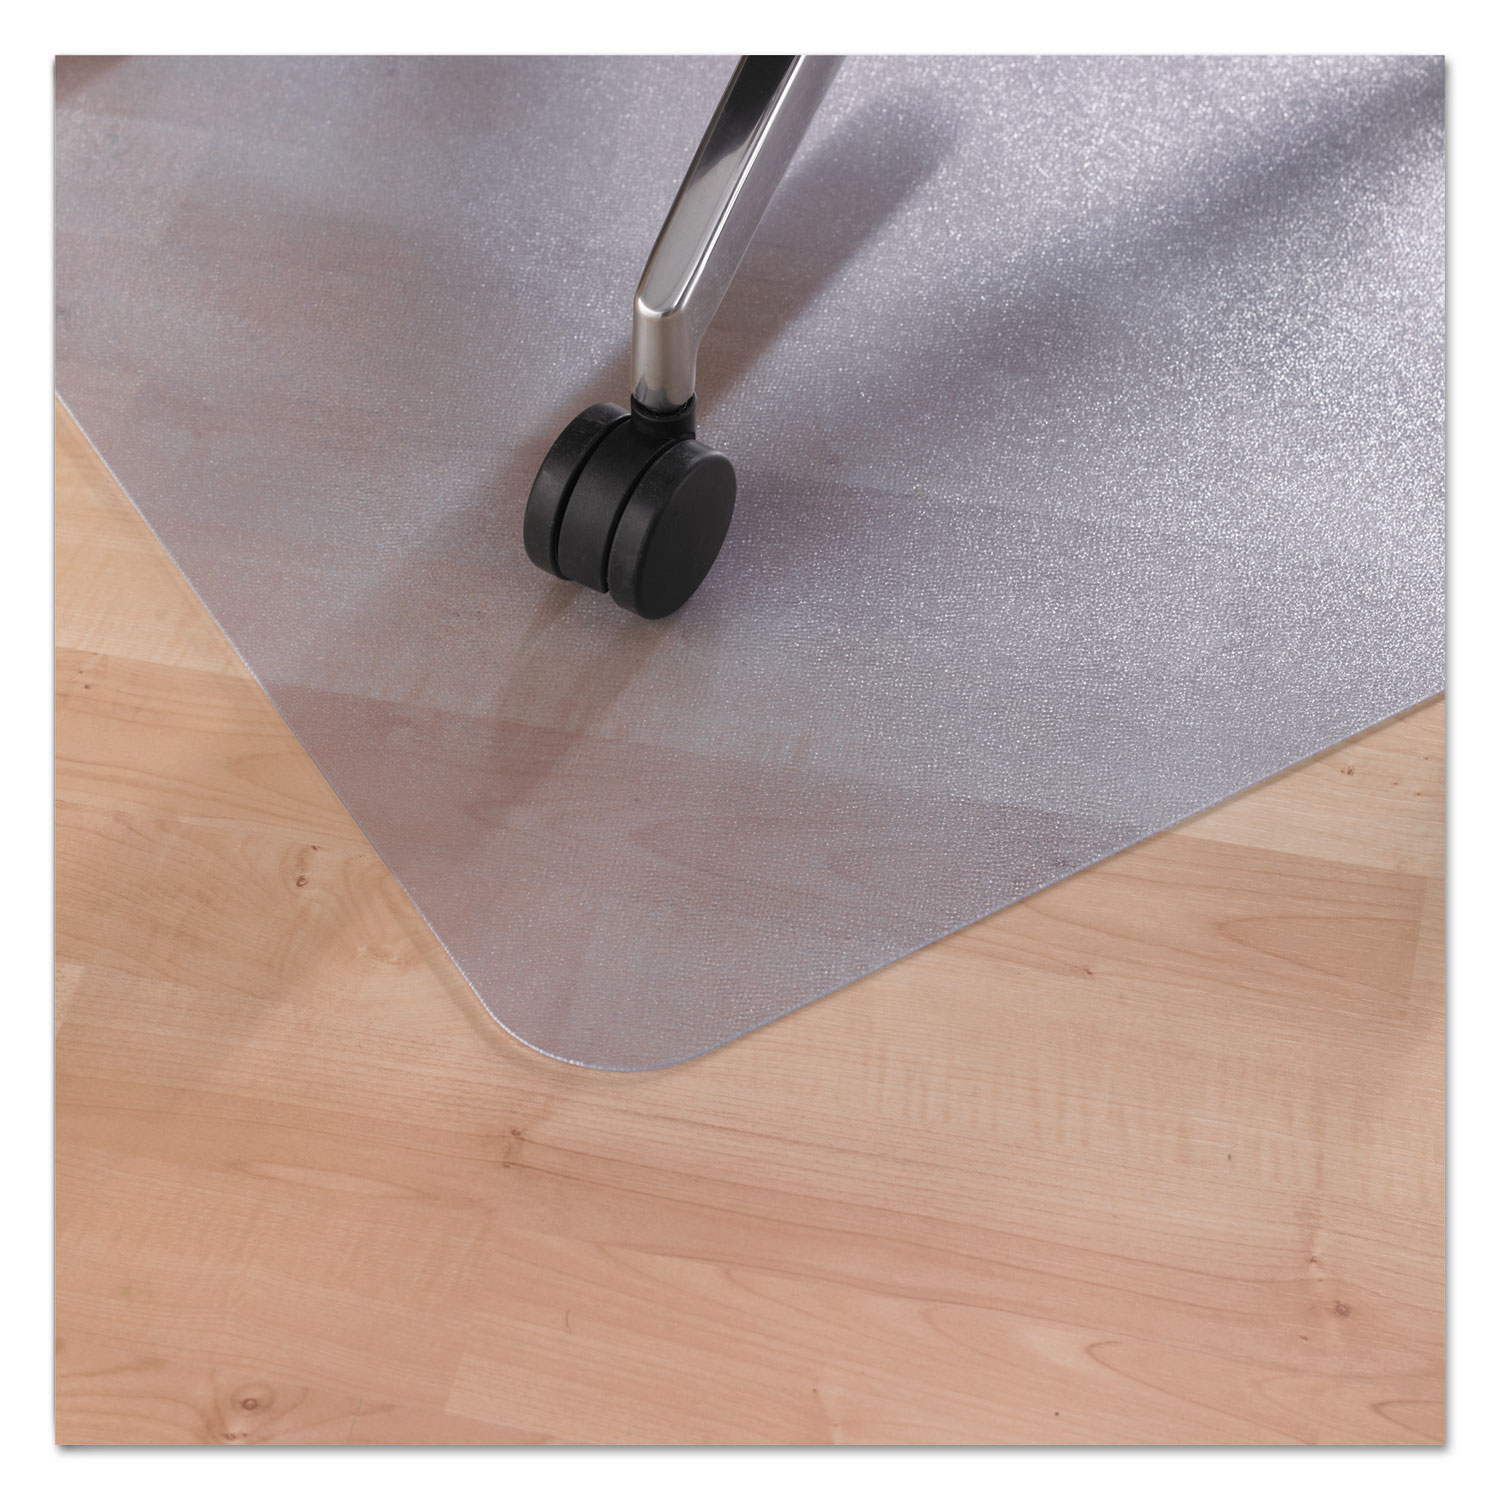  Floortex ECO3648EP EcoTex Revolutionmat Recycled Chair Mat for Hard Floors, 48 x 36 (FLRECO3648EP) 